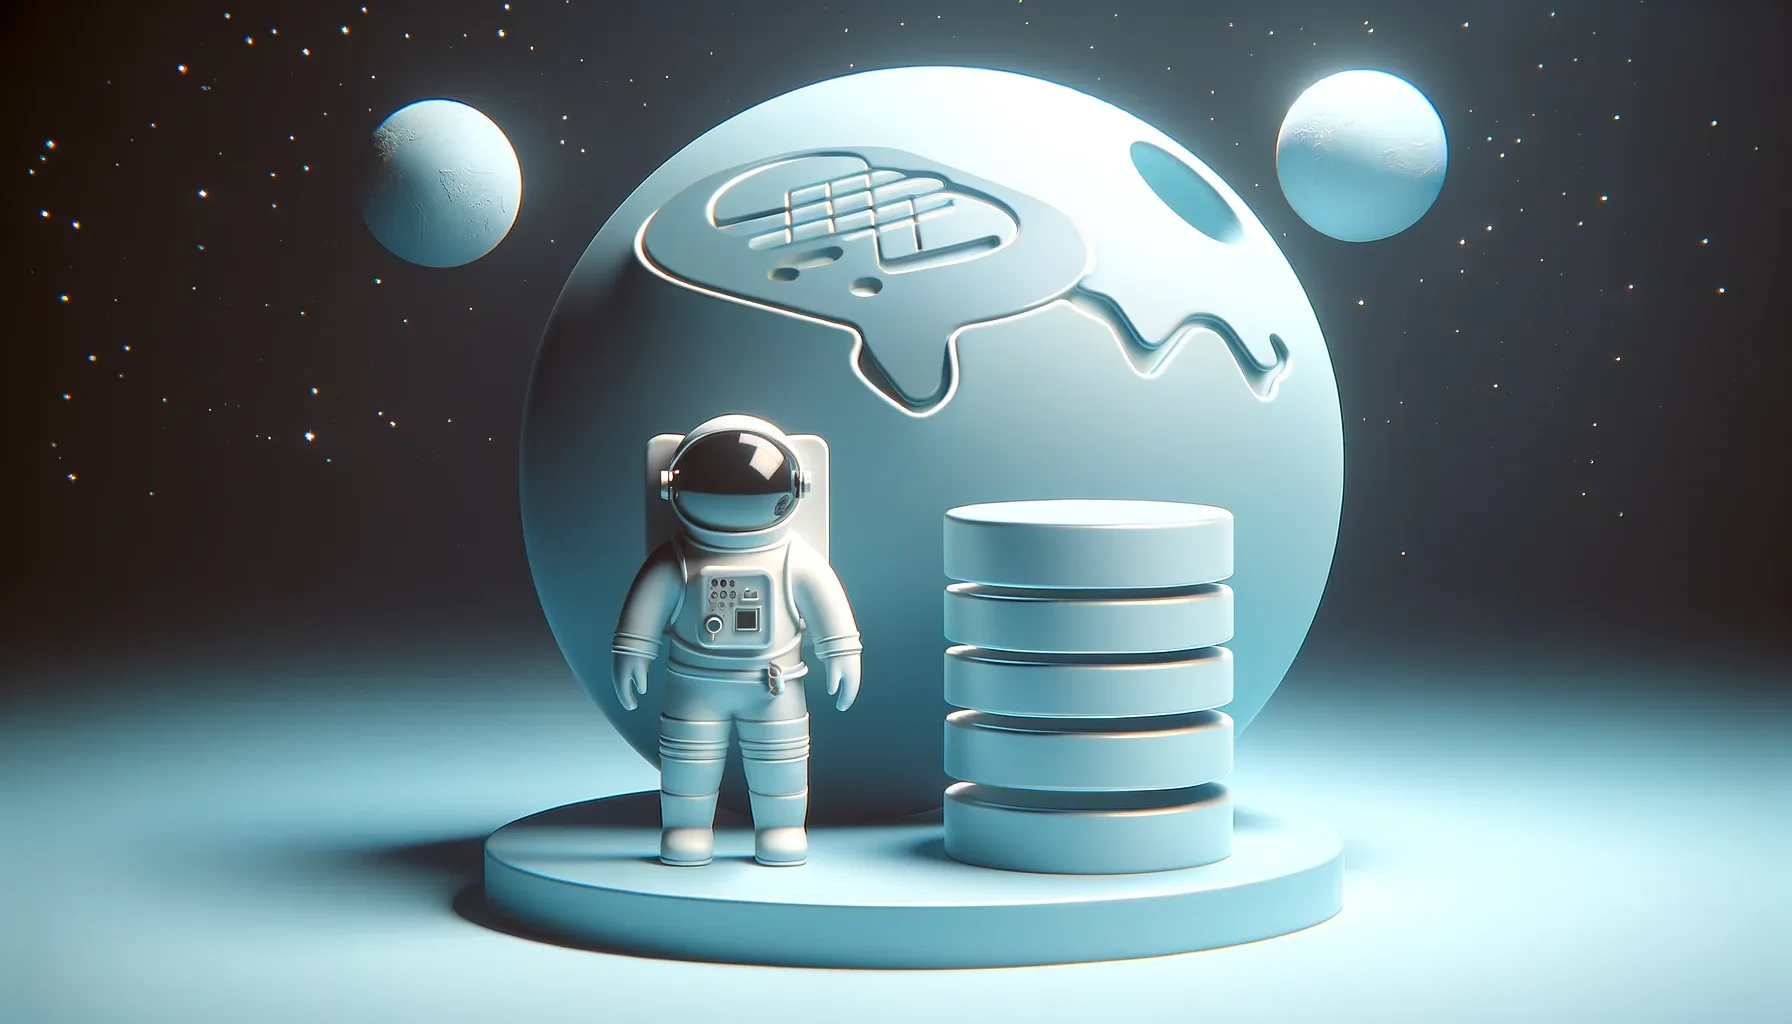 An cartoon astronaut standing on a platform besides a huge database with a planet with two moons in the background